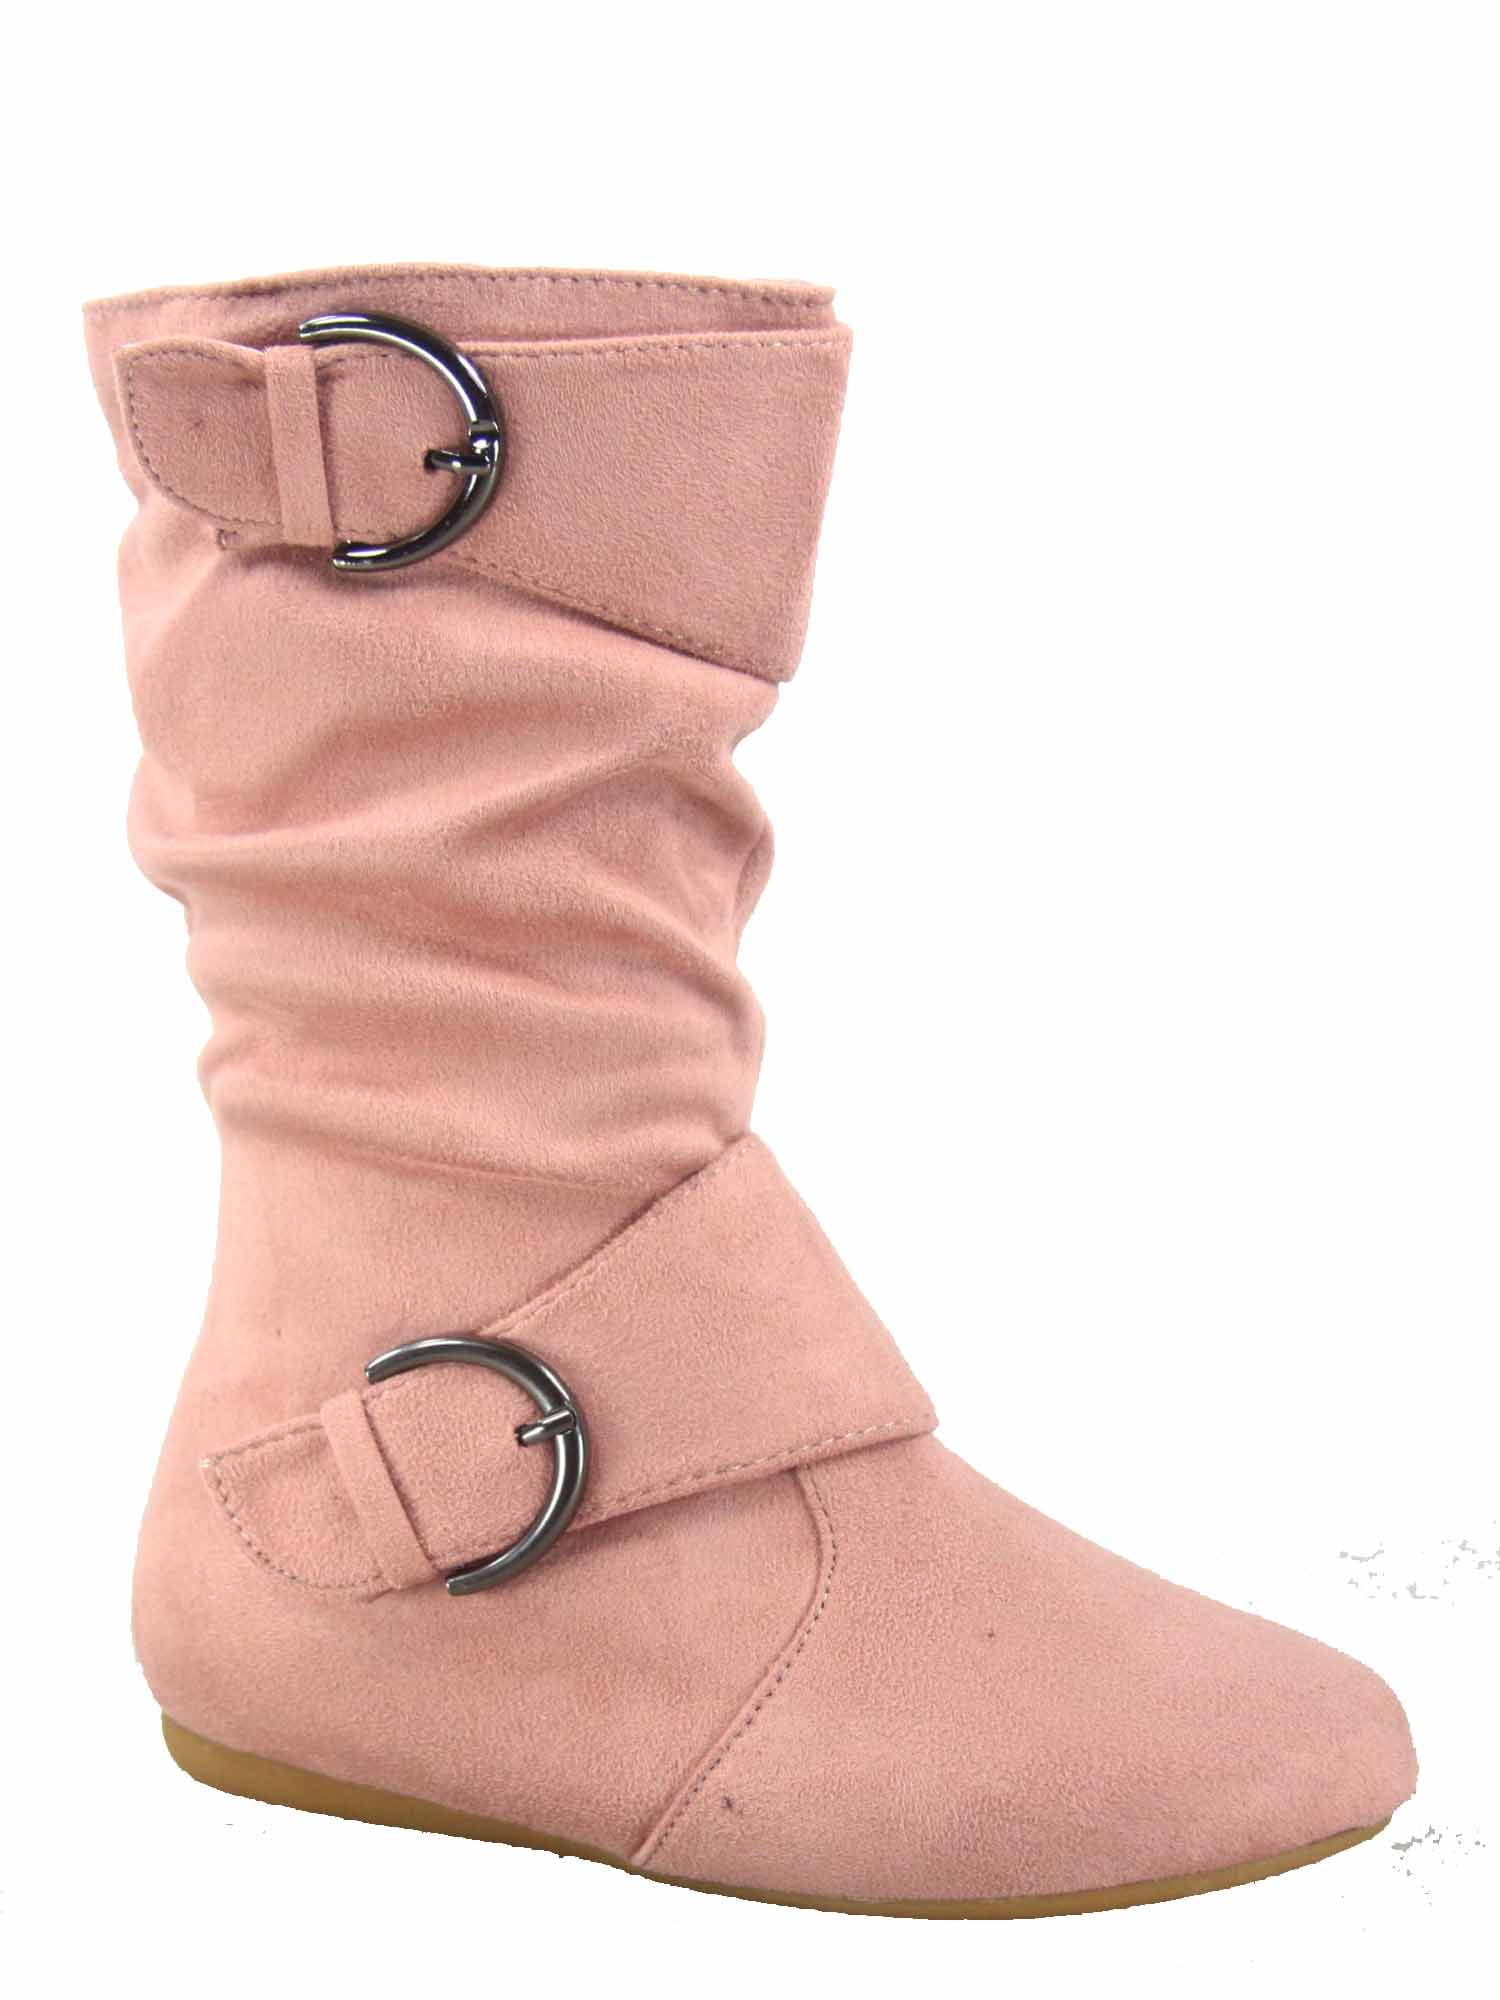 Link Klein-70K Girl's Kid's Faux Suede Two Buckle Zipper Flat Heel Mid Calf Slouchy Boot Shoes 